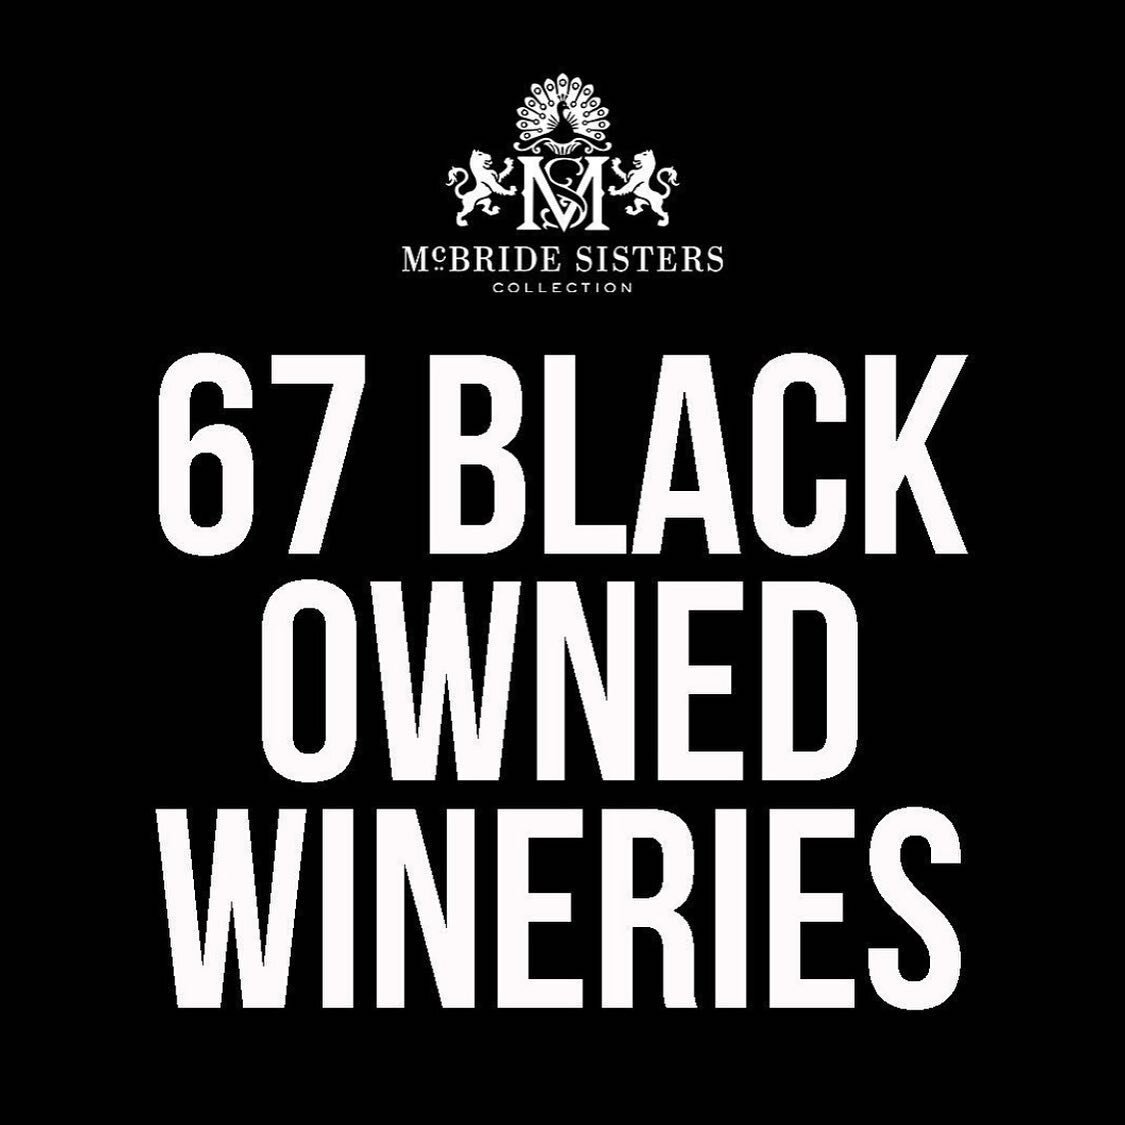 Reposting this! Shout out to the @mcbridesisters for compiling and creating this post🍷 Follow, support, and buy wine from Black owned wineries!🍷Also follow Robin and Andr&eacute;a who started @mcbridesisters , the largest Black owned wine company i